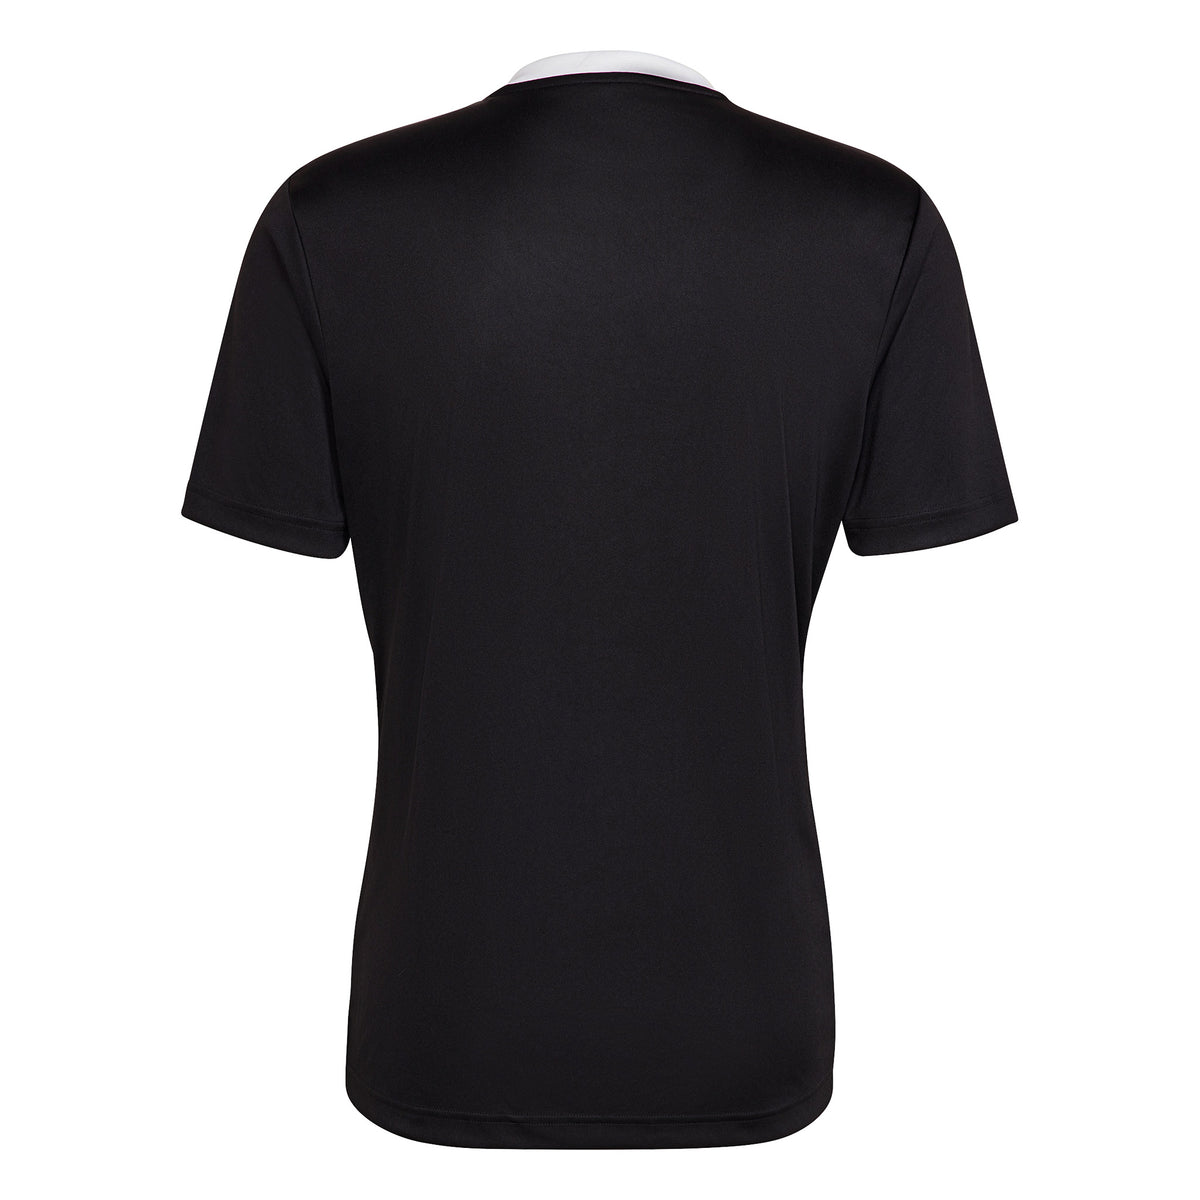 Tulse Hill and Dulwich HC GK Jersey: Black